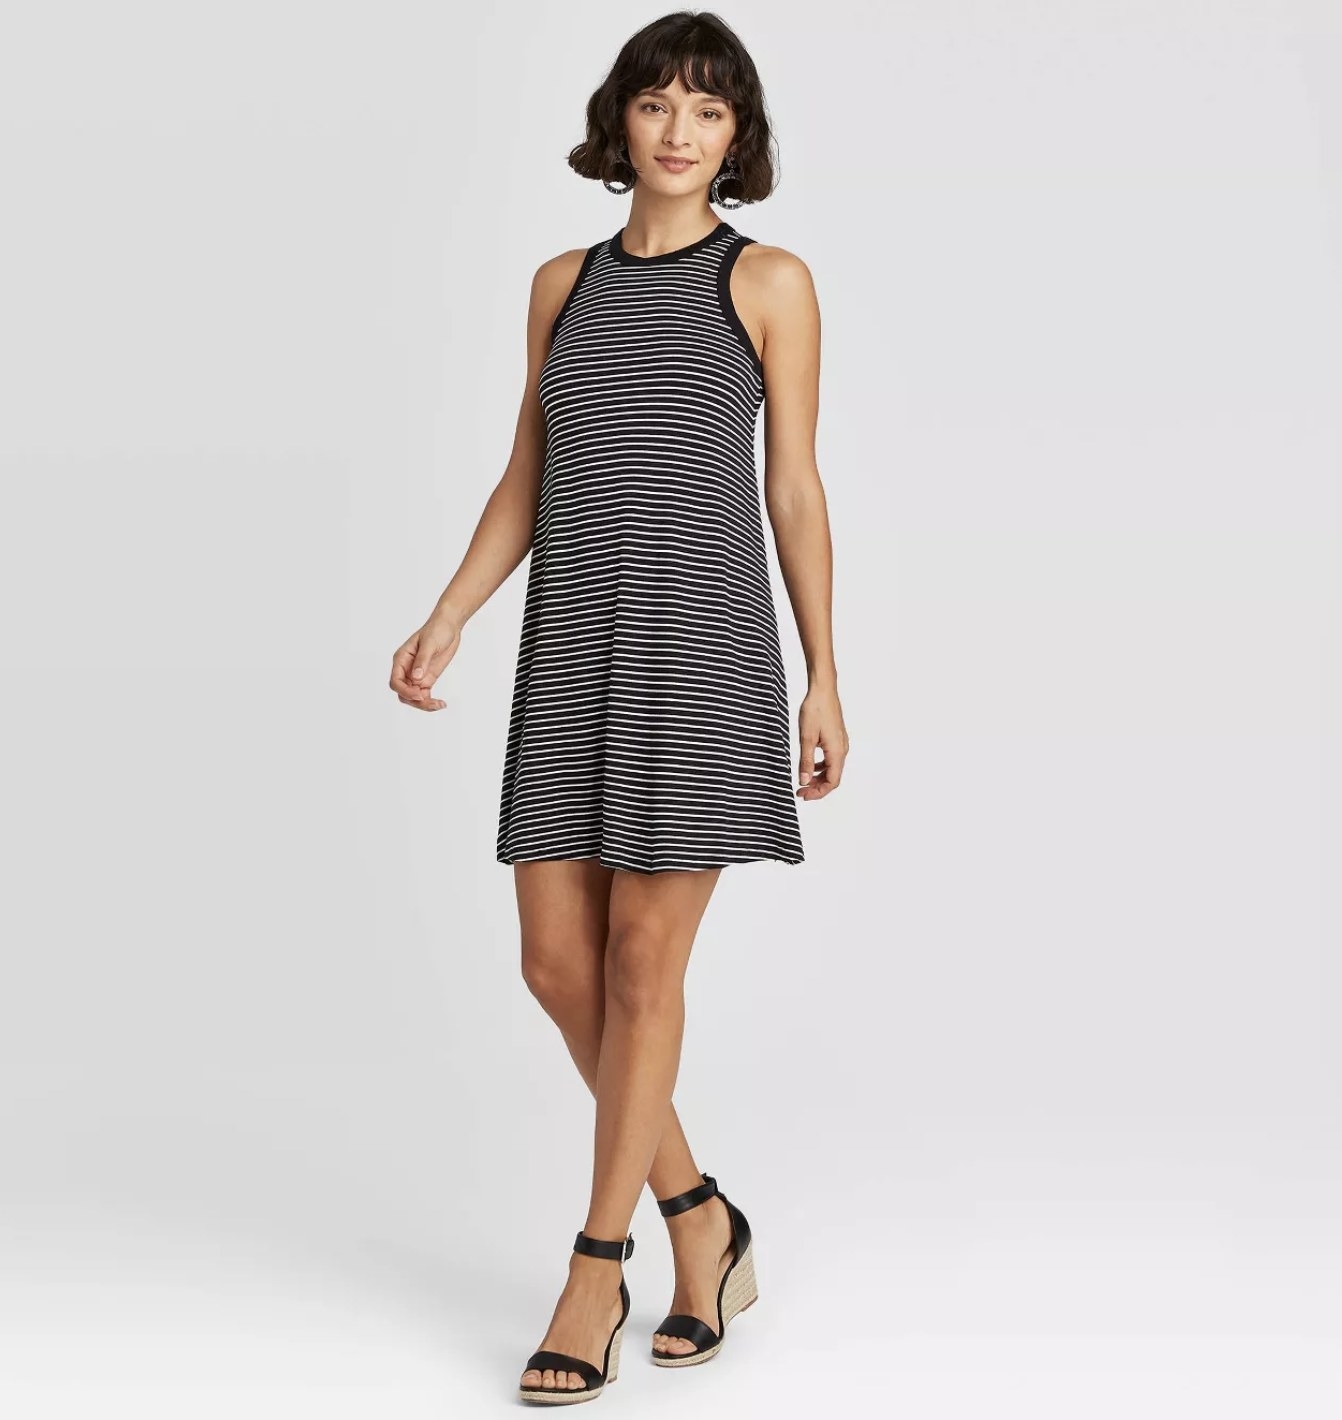 A model wearing a black and white horizontal striped dress that hits mid thigh